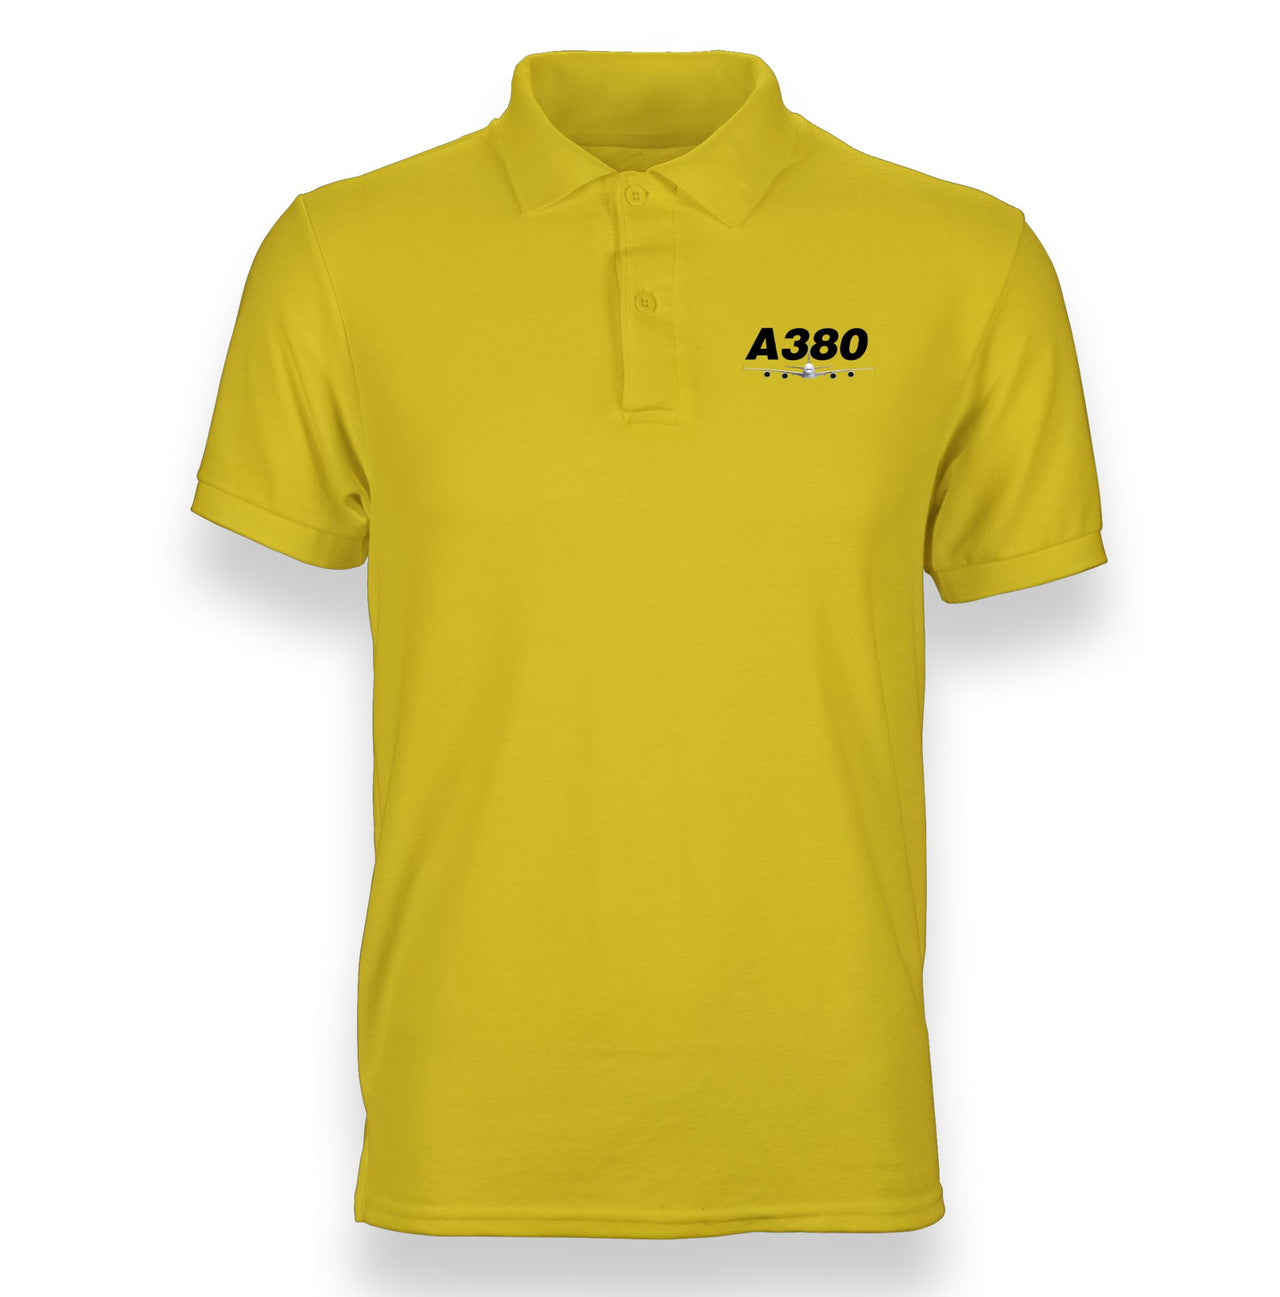 Super Airbus A380 Designed "WOMEN" Polo T-Shirts